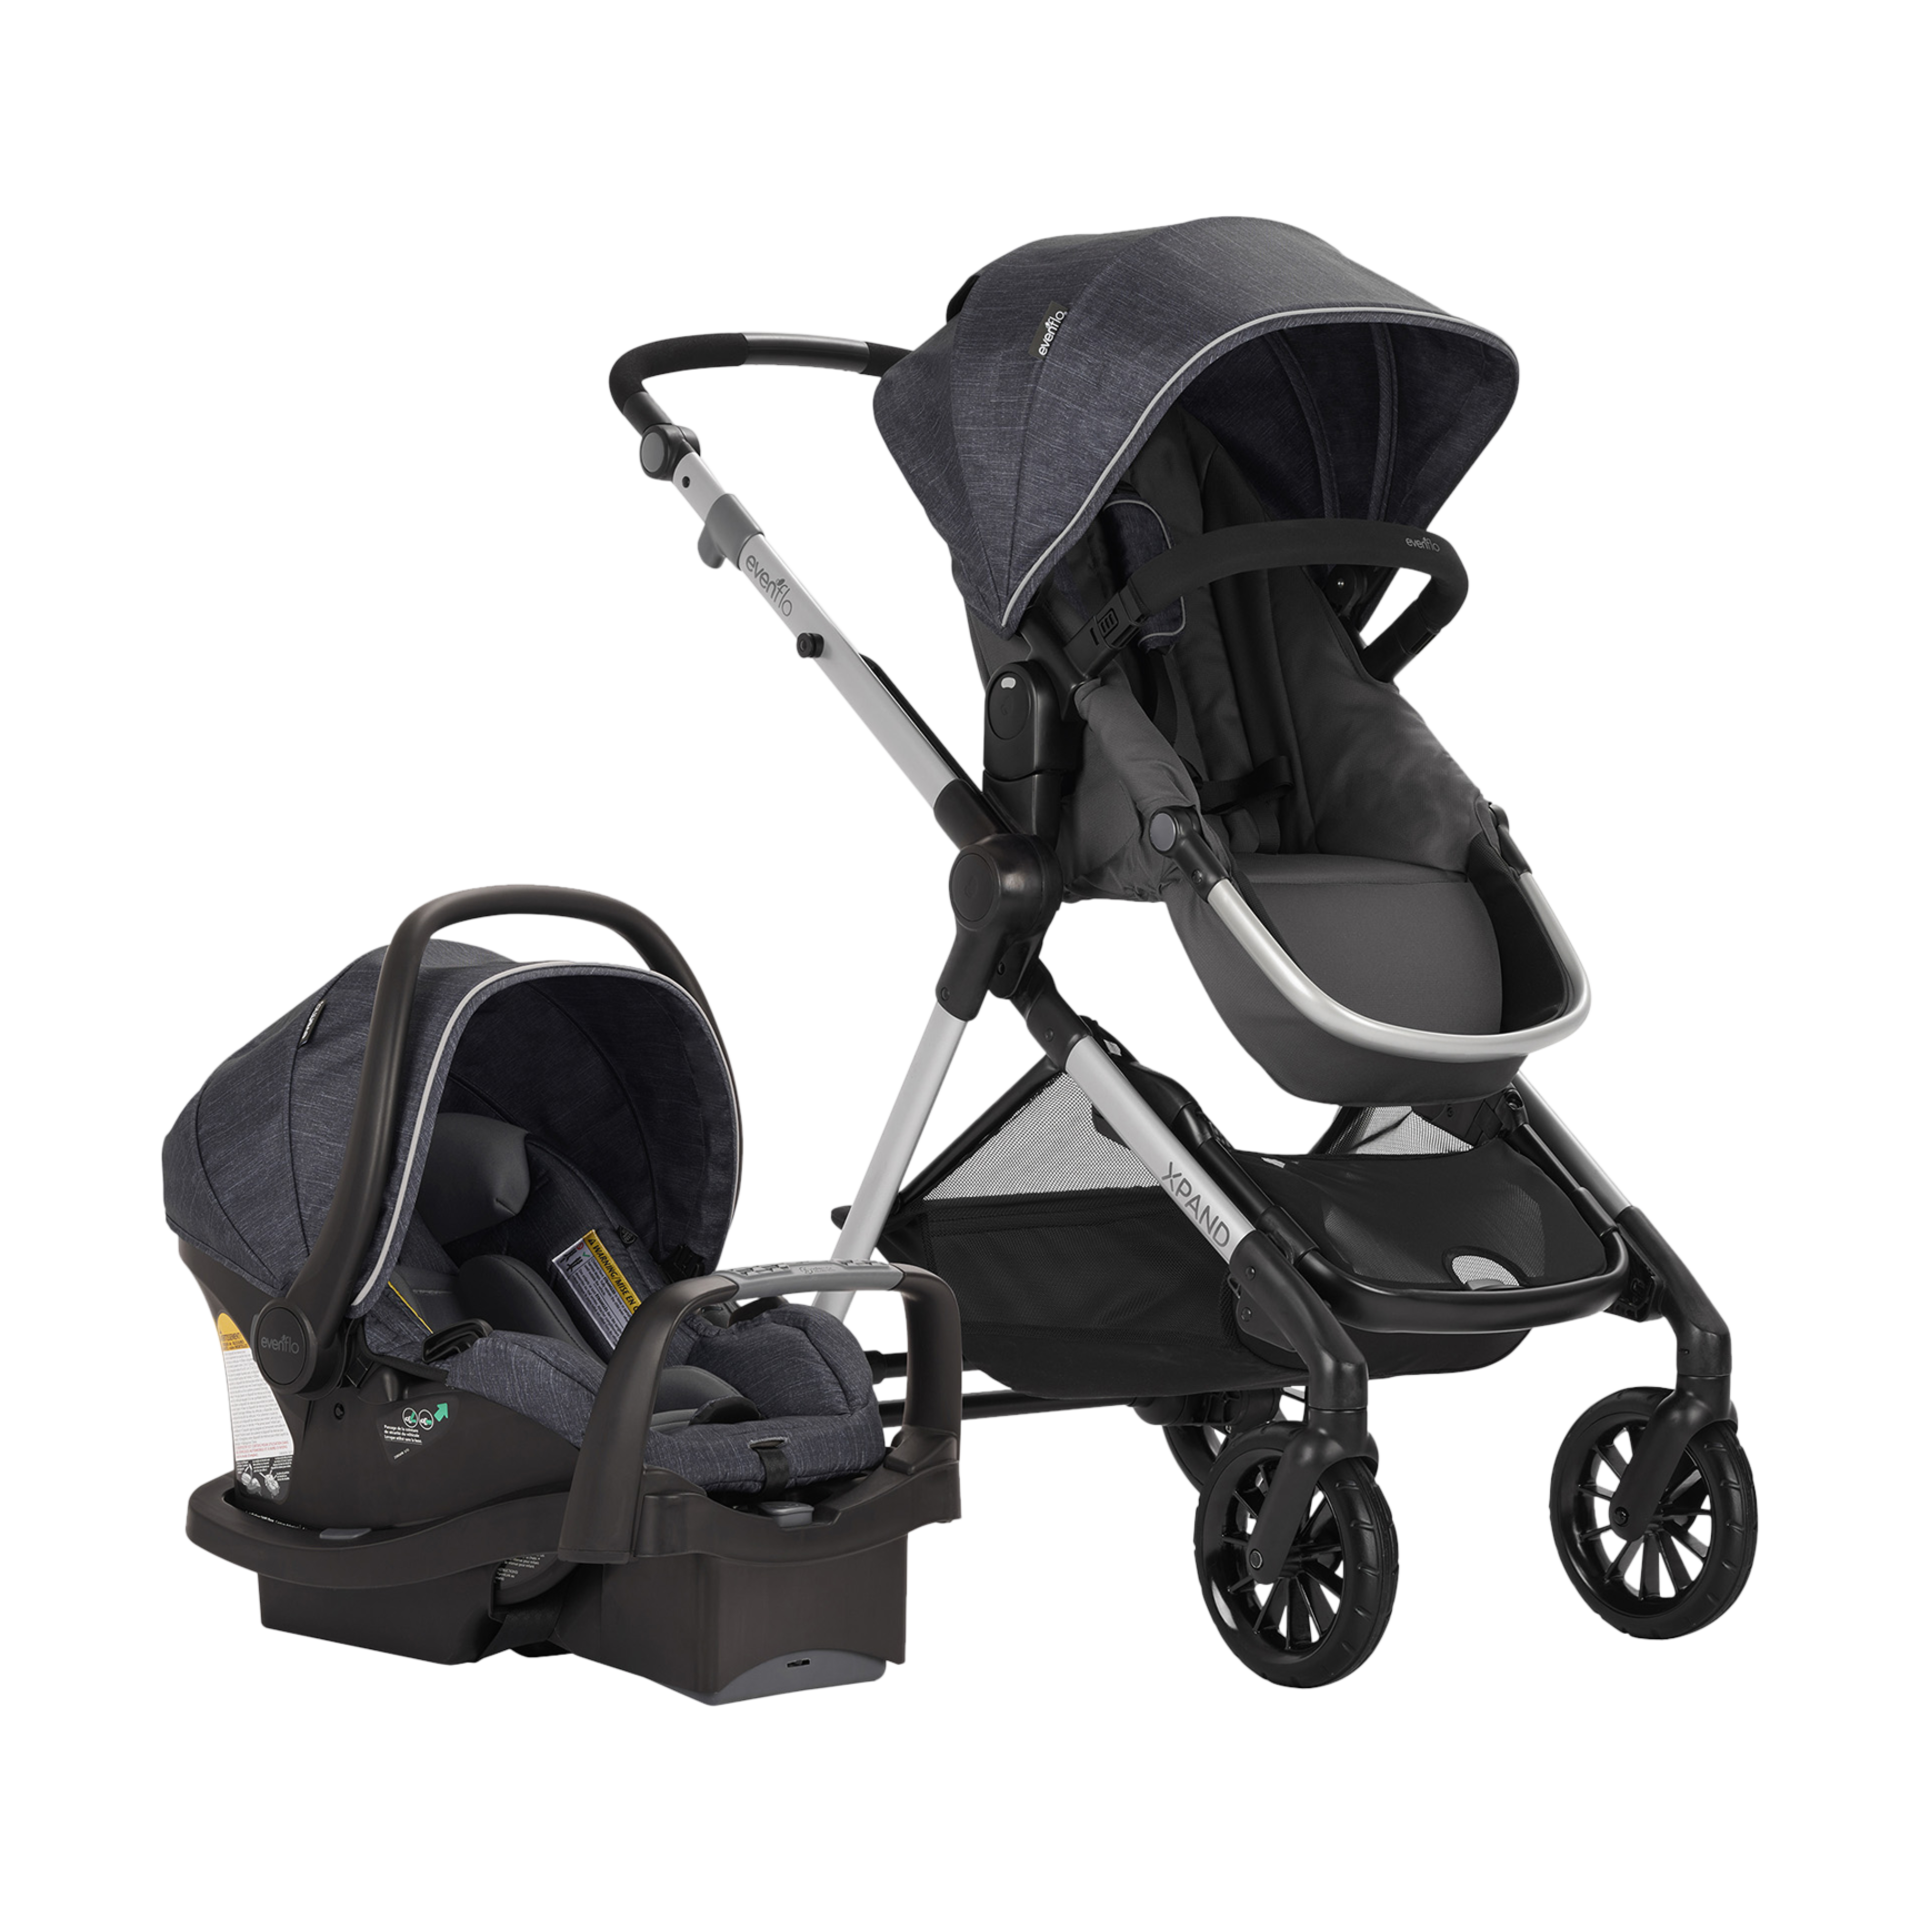 evenflo two seat stroller